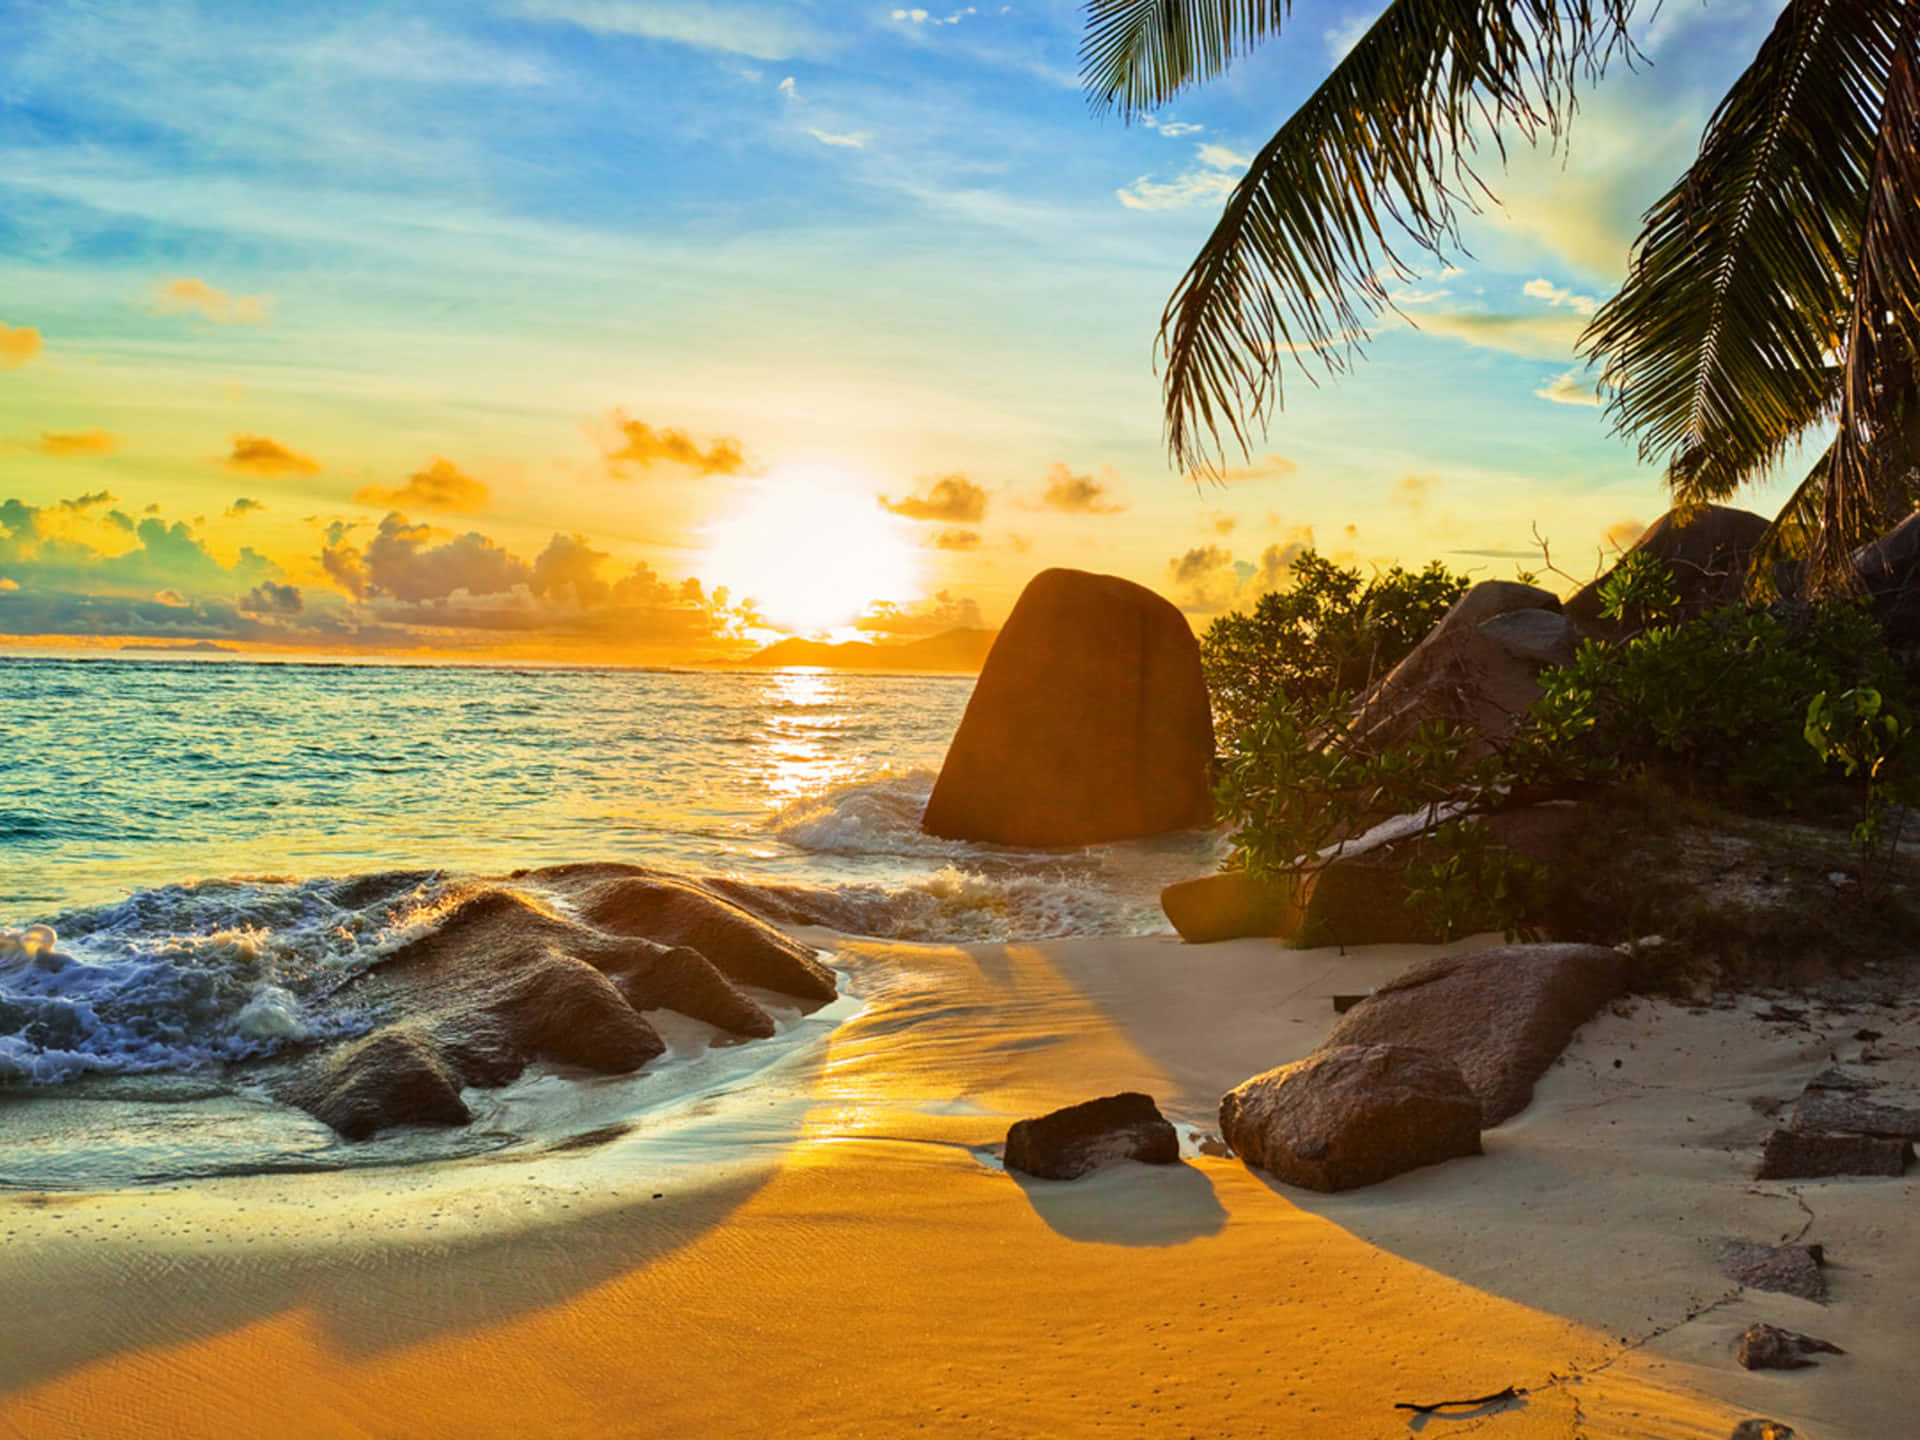 A Beach With Palm Trees And Rocks At Sunset Wallpaper